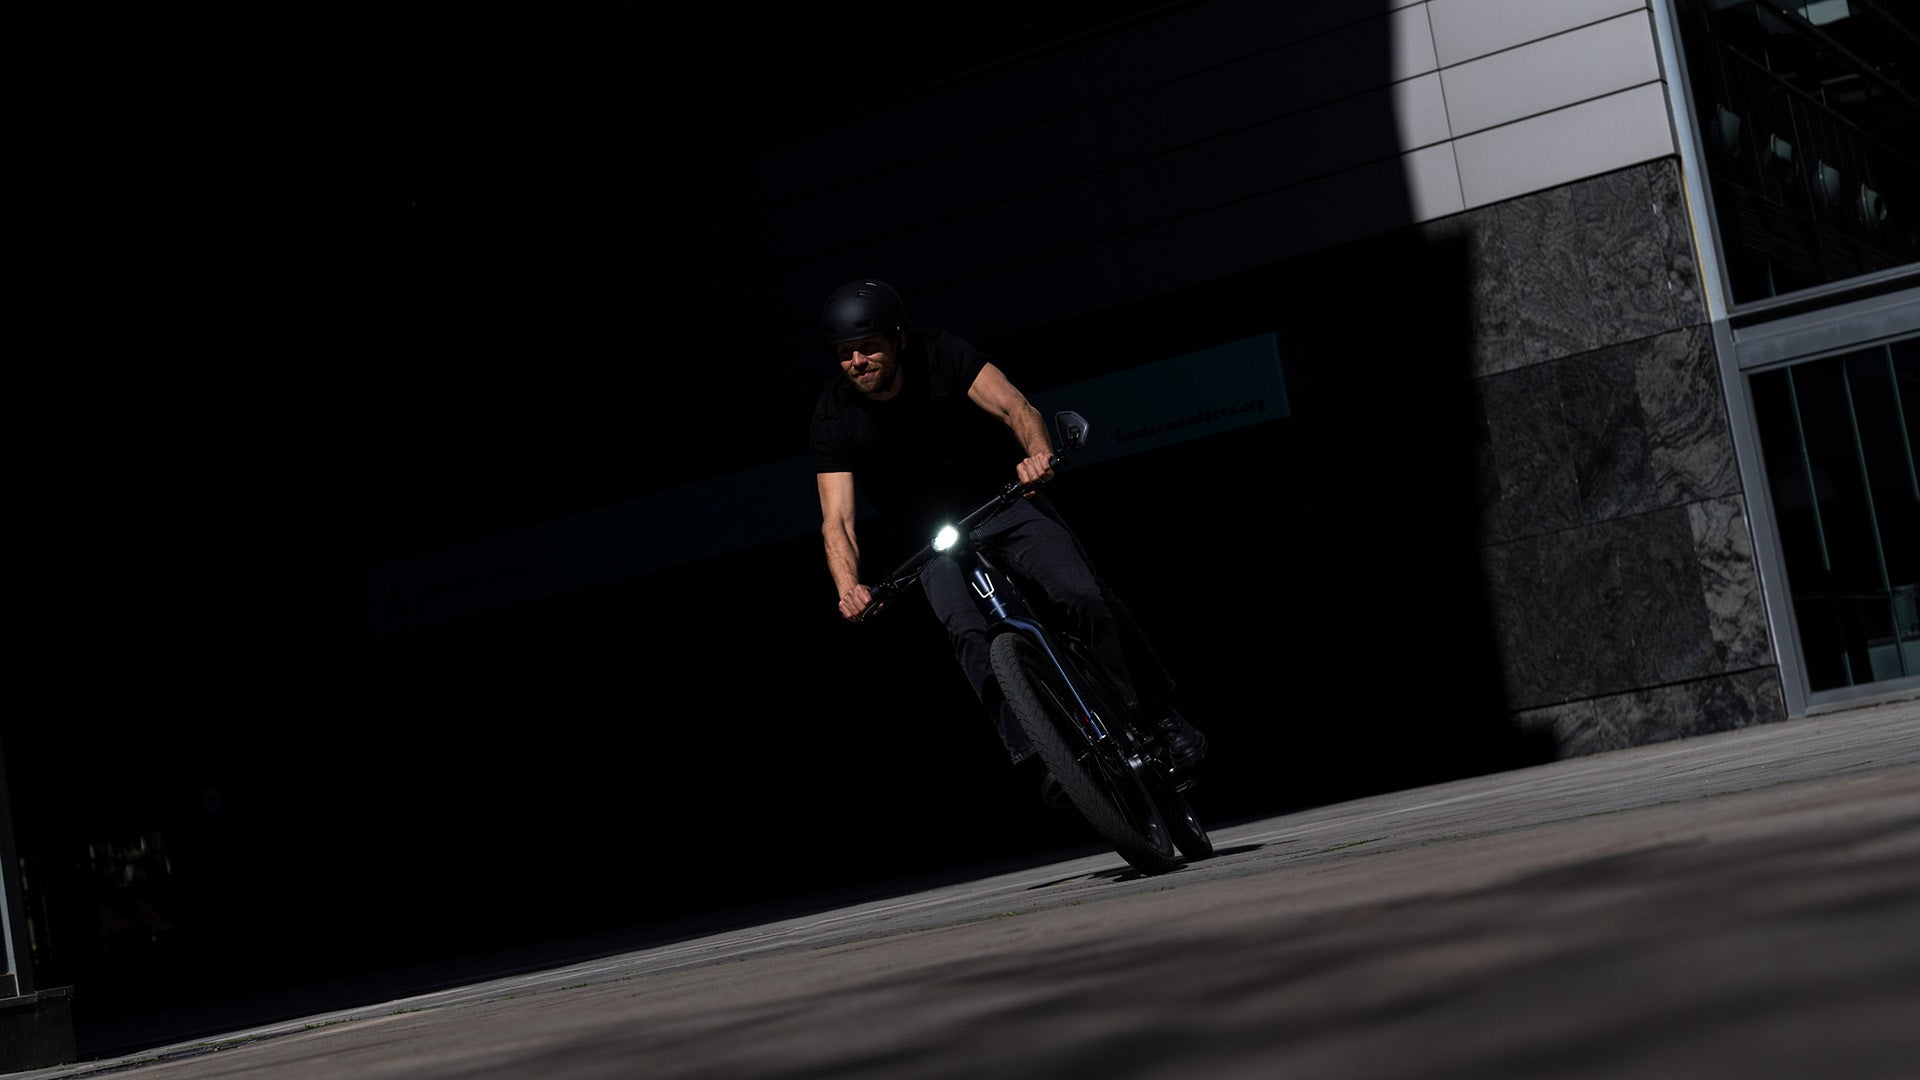 A man in black clothing and helmet rides an eBike, the Stromer ST7 Alinghi Red Bull Racing Edition, in front of a modern building in a shaded urban setting.